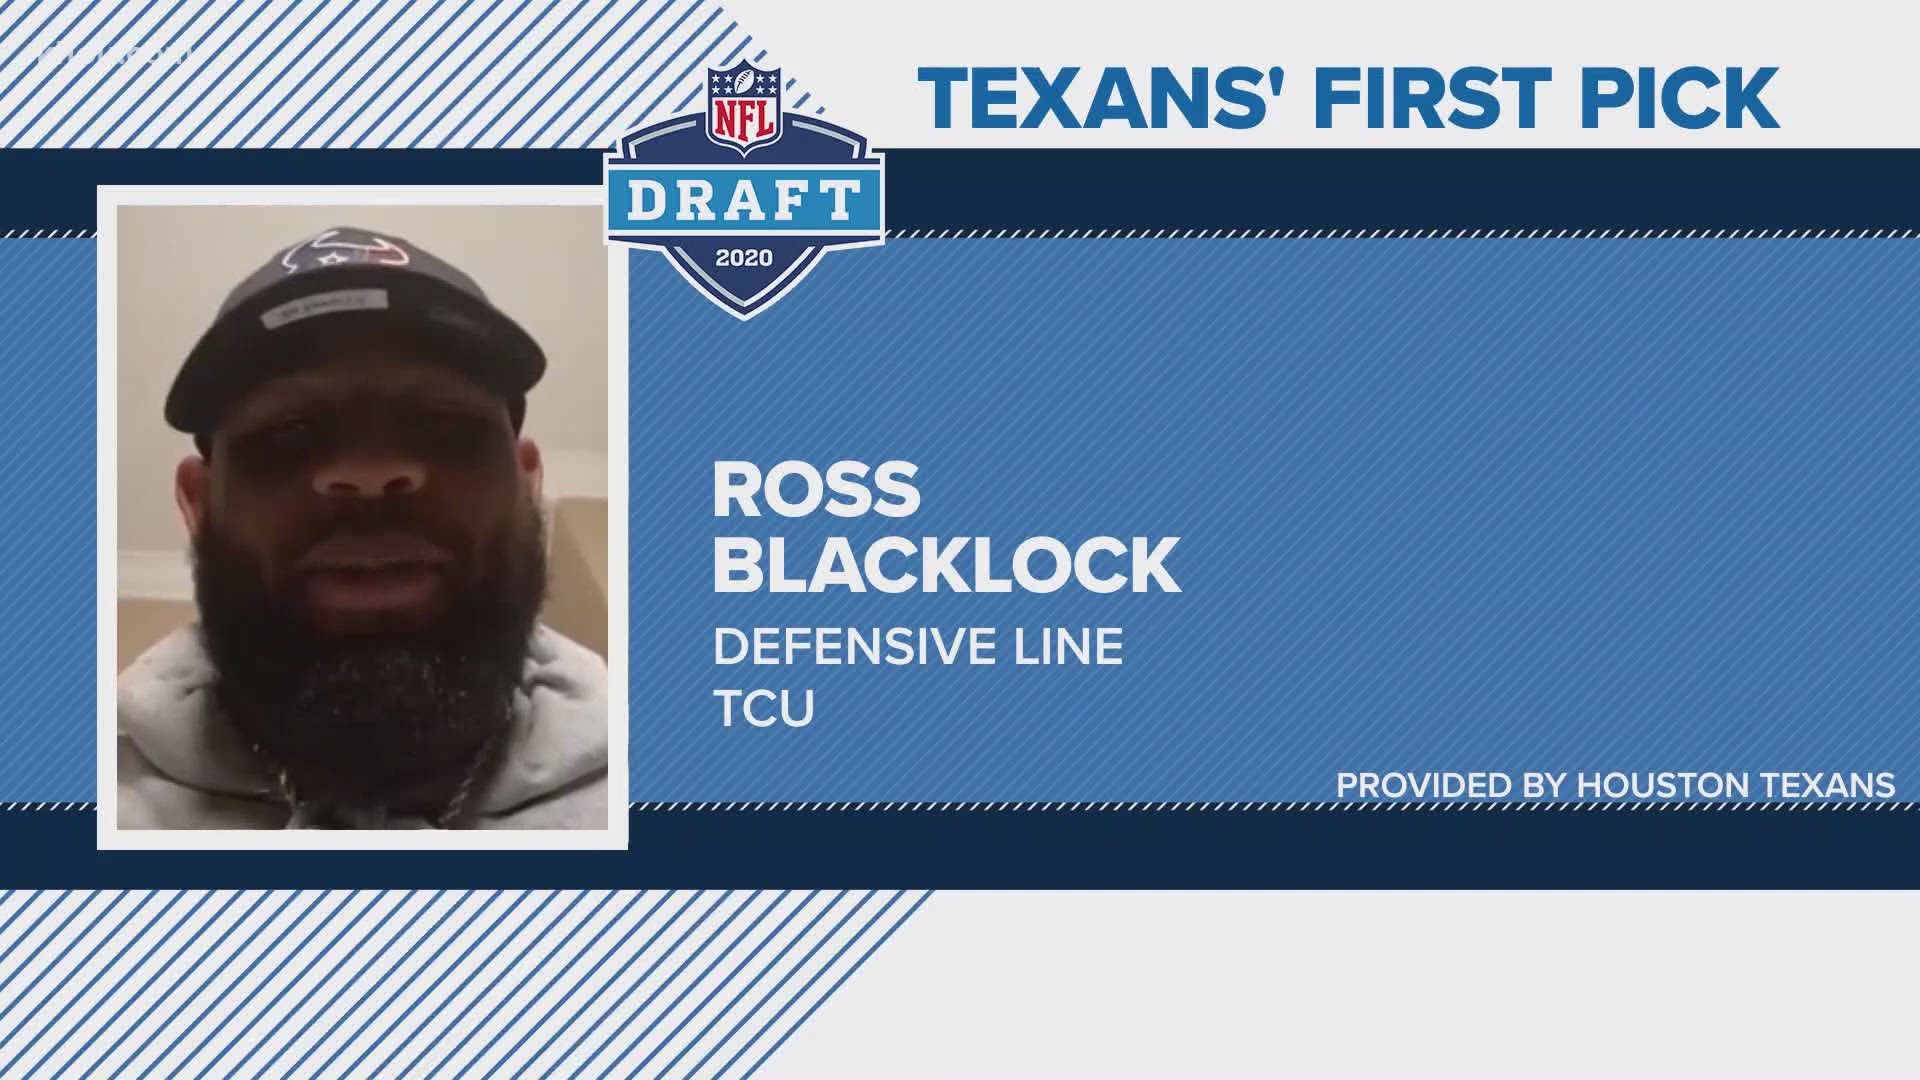 The Houston Texans used their first pick in the 2020 NFL Draft to select Ross Blacklock, TCU defensive tackle and Elkins High School alumnus.